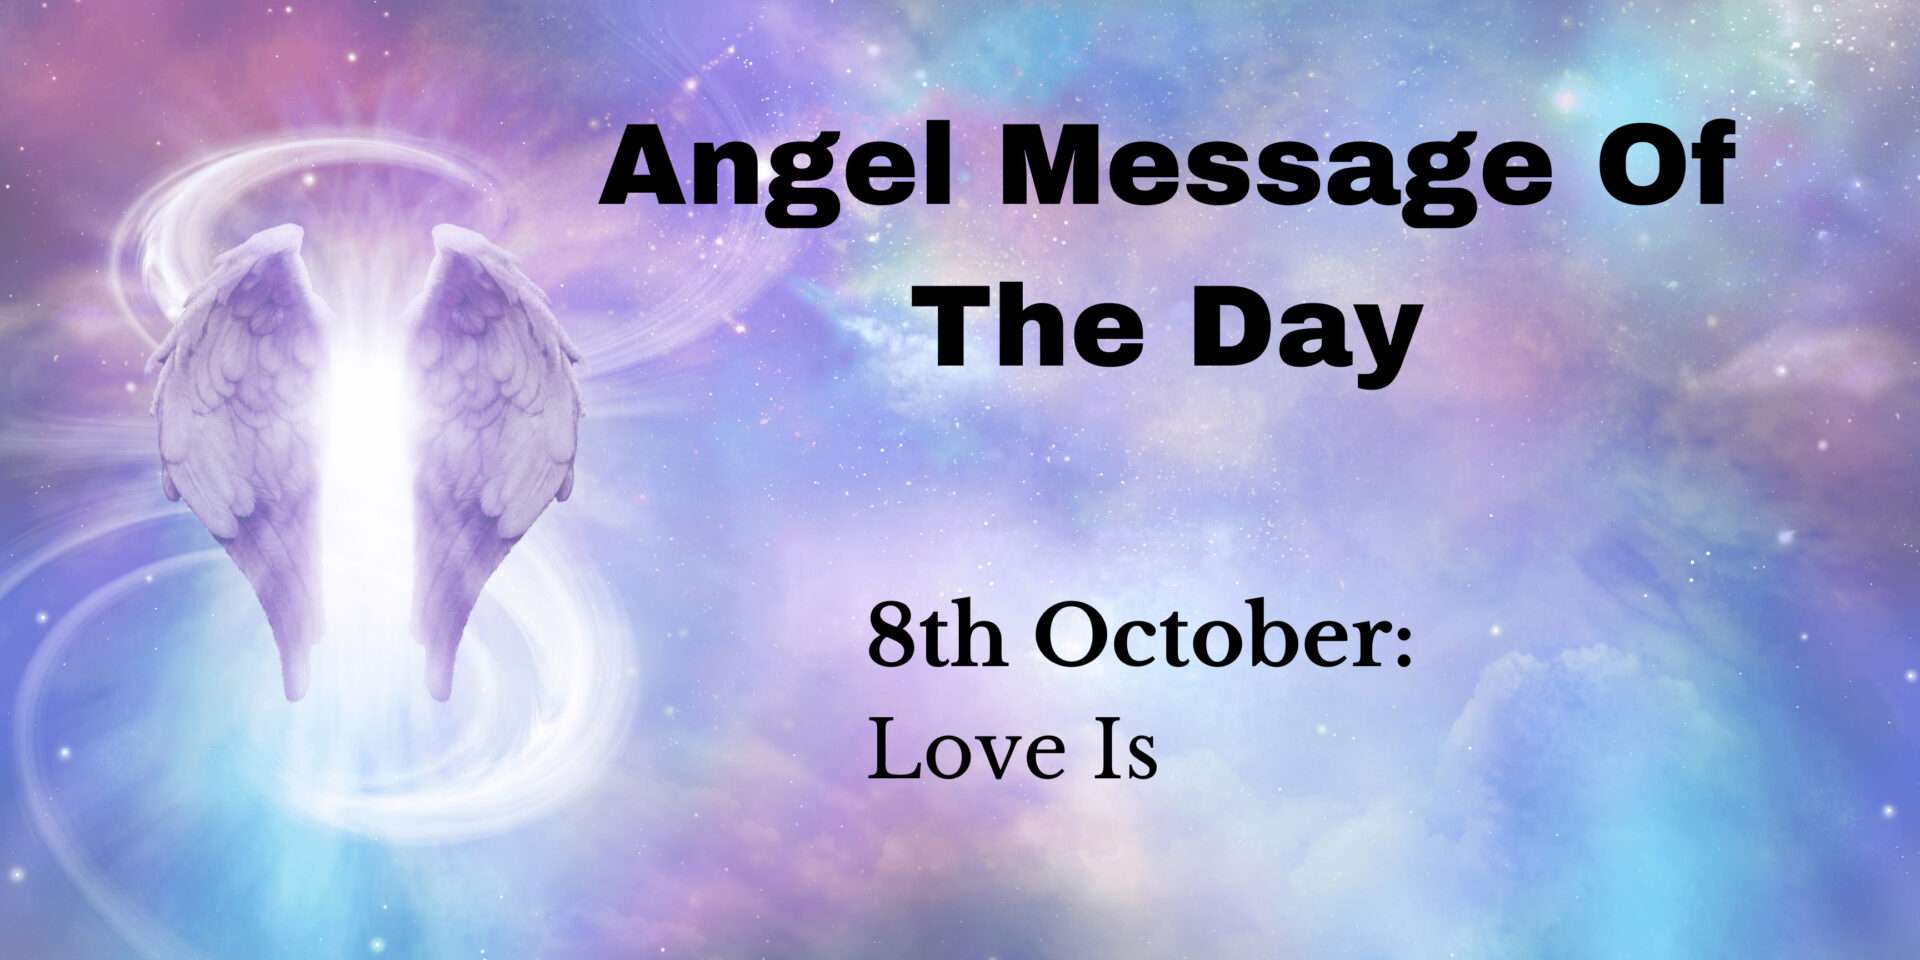 angel message of the day : love is